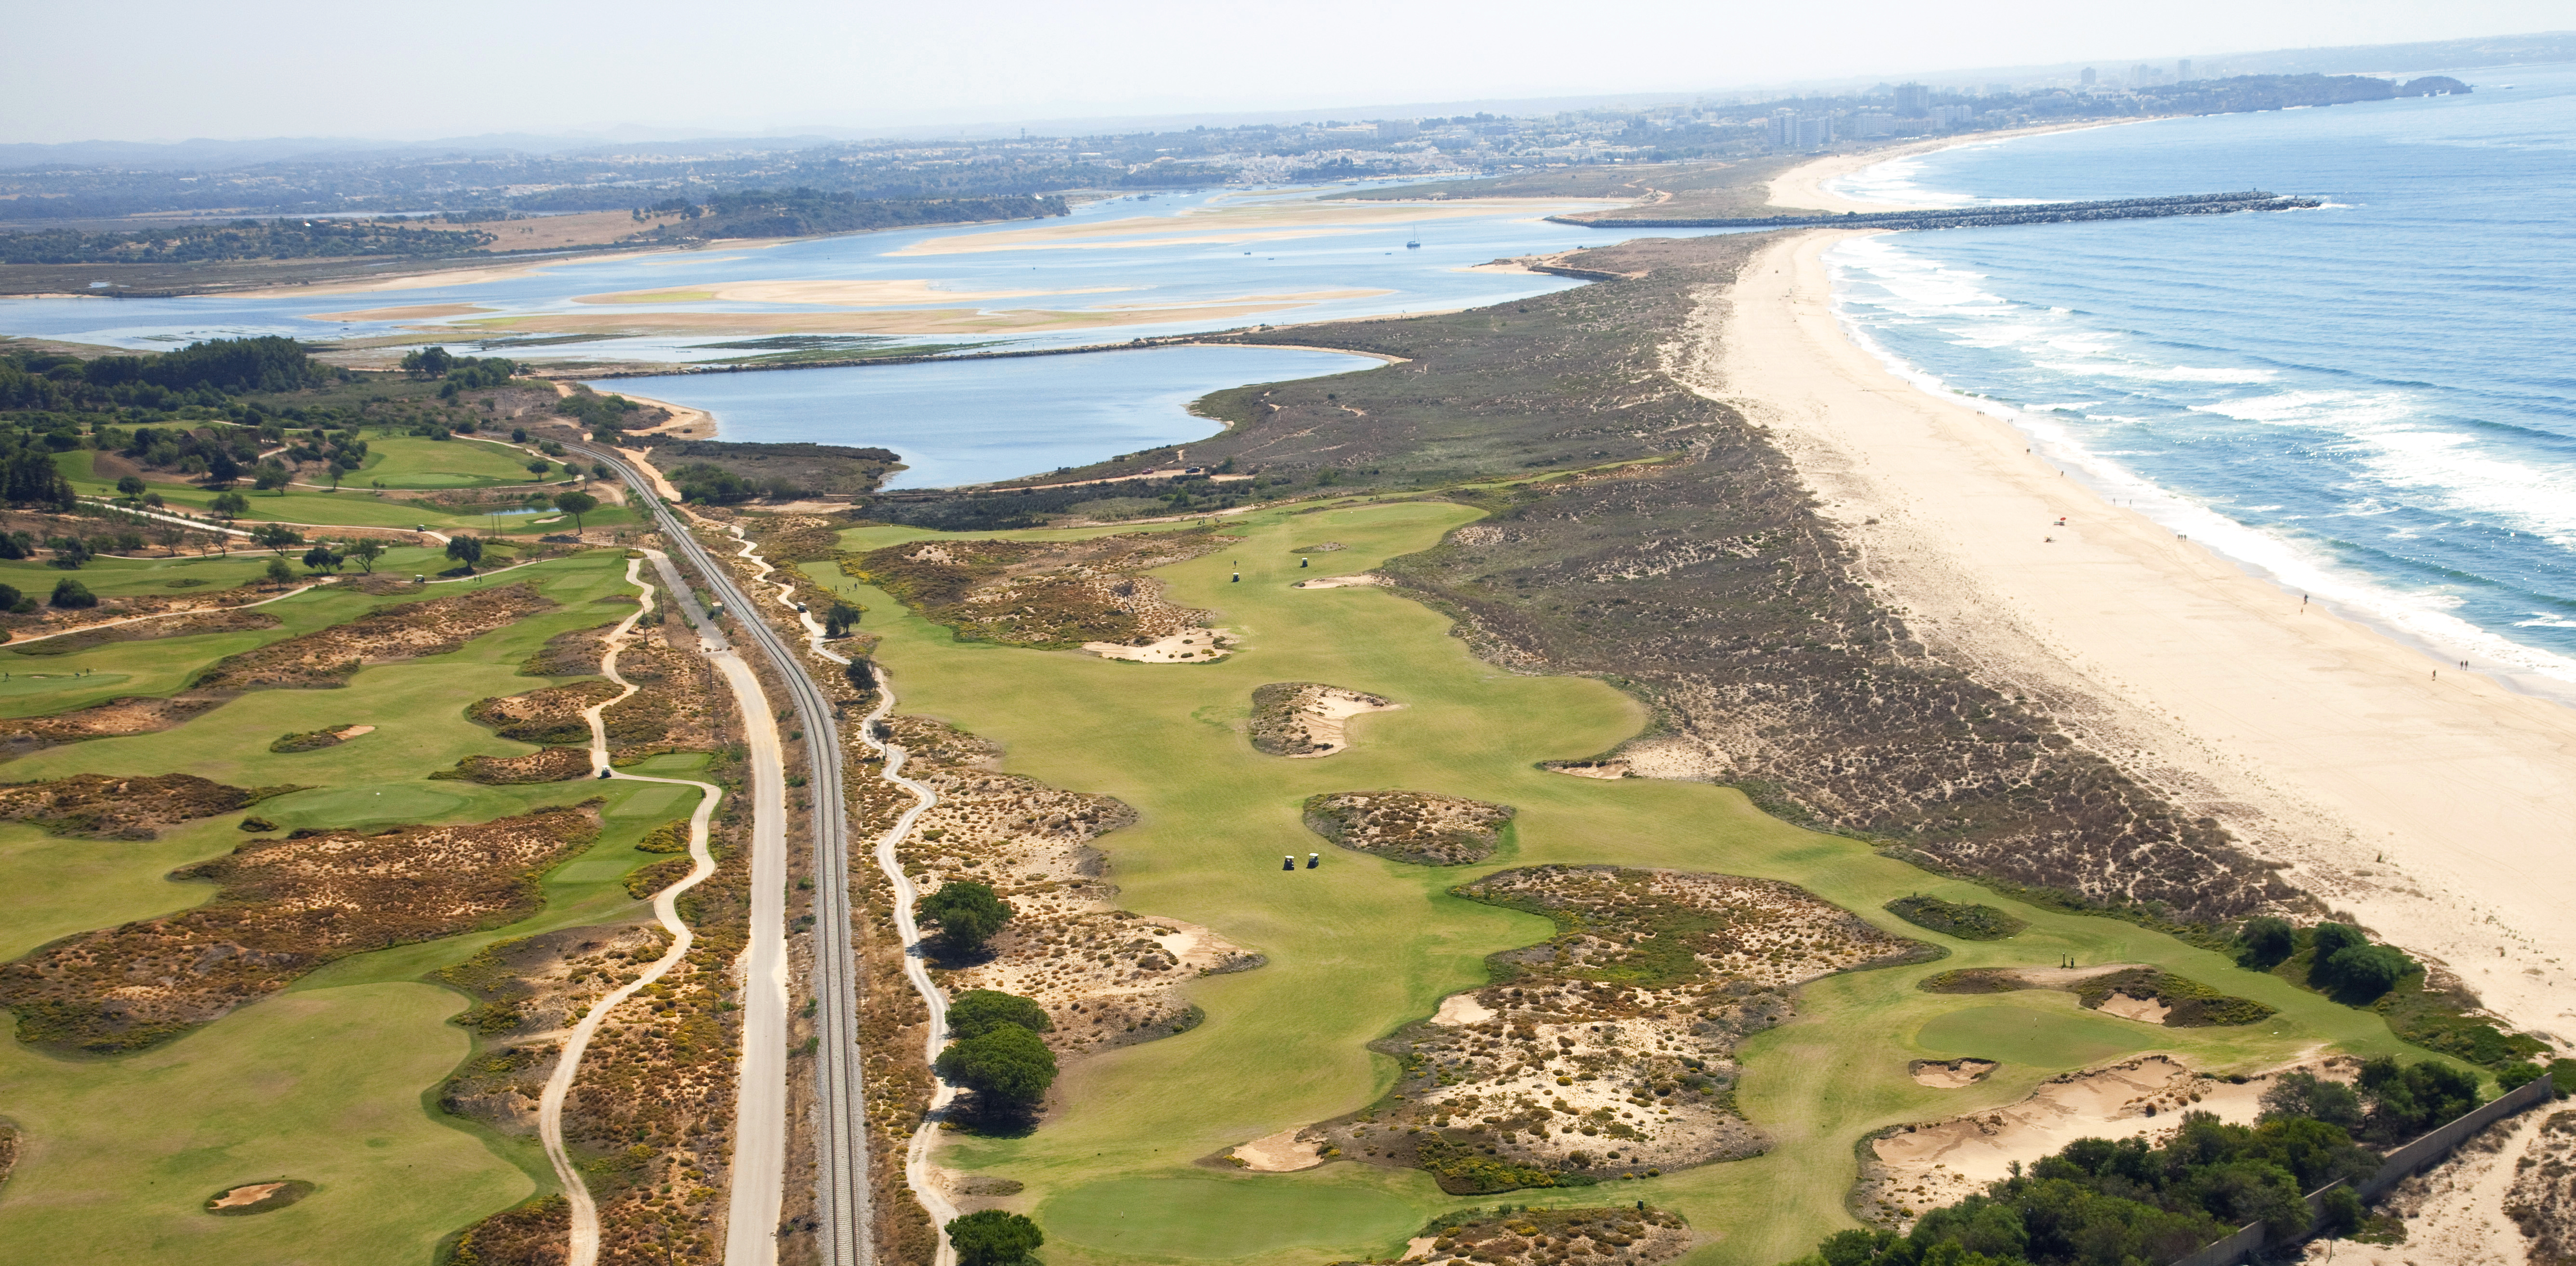 Top 5 golf courses in the Algarve, Portugal 